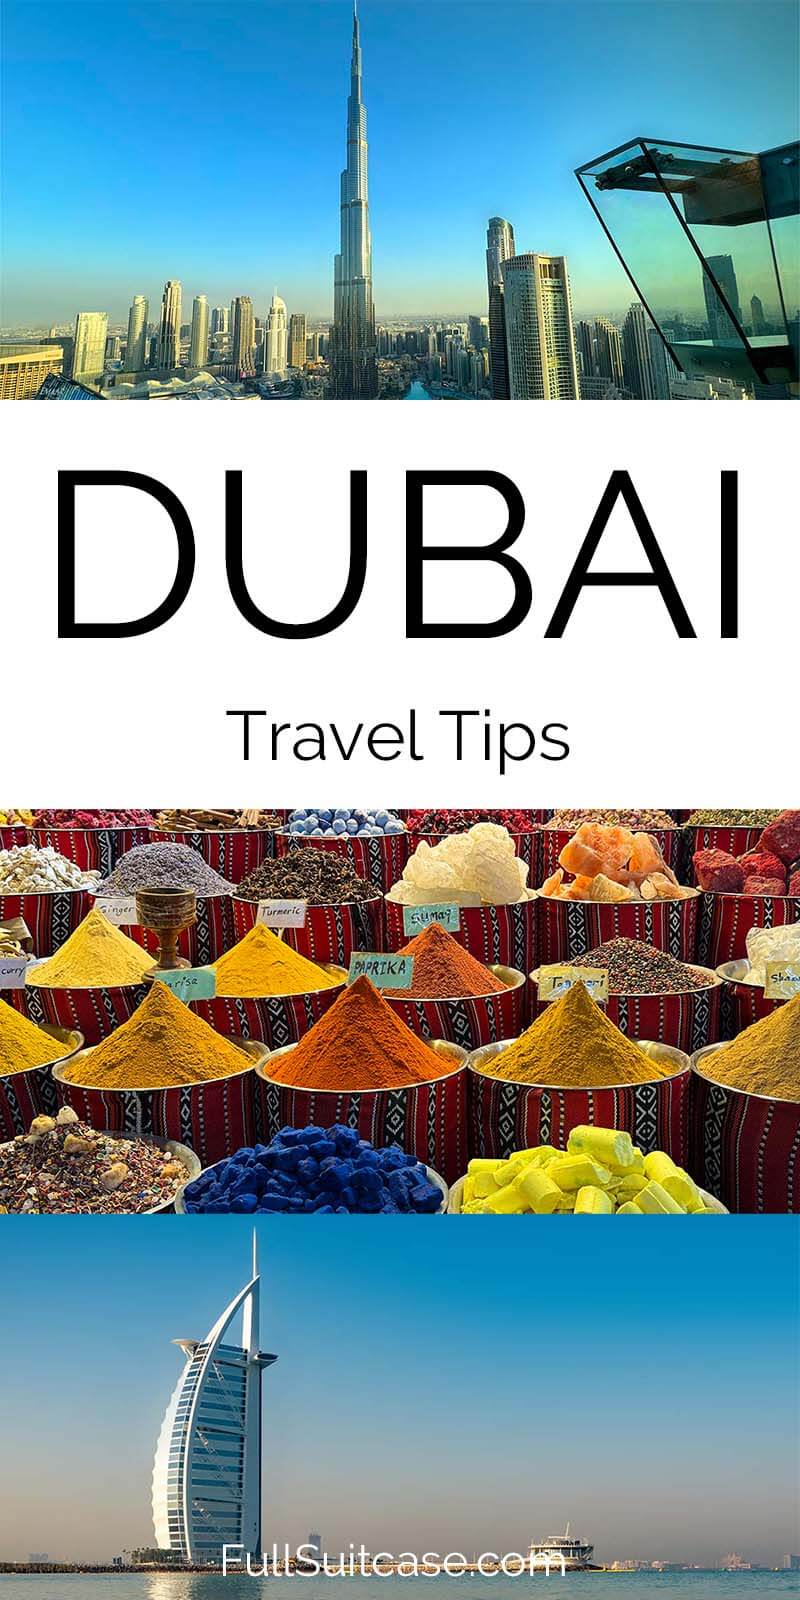 Dubai travel tips and information for first time visitors